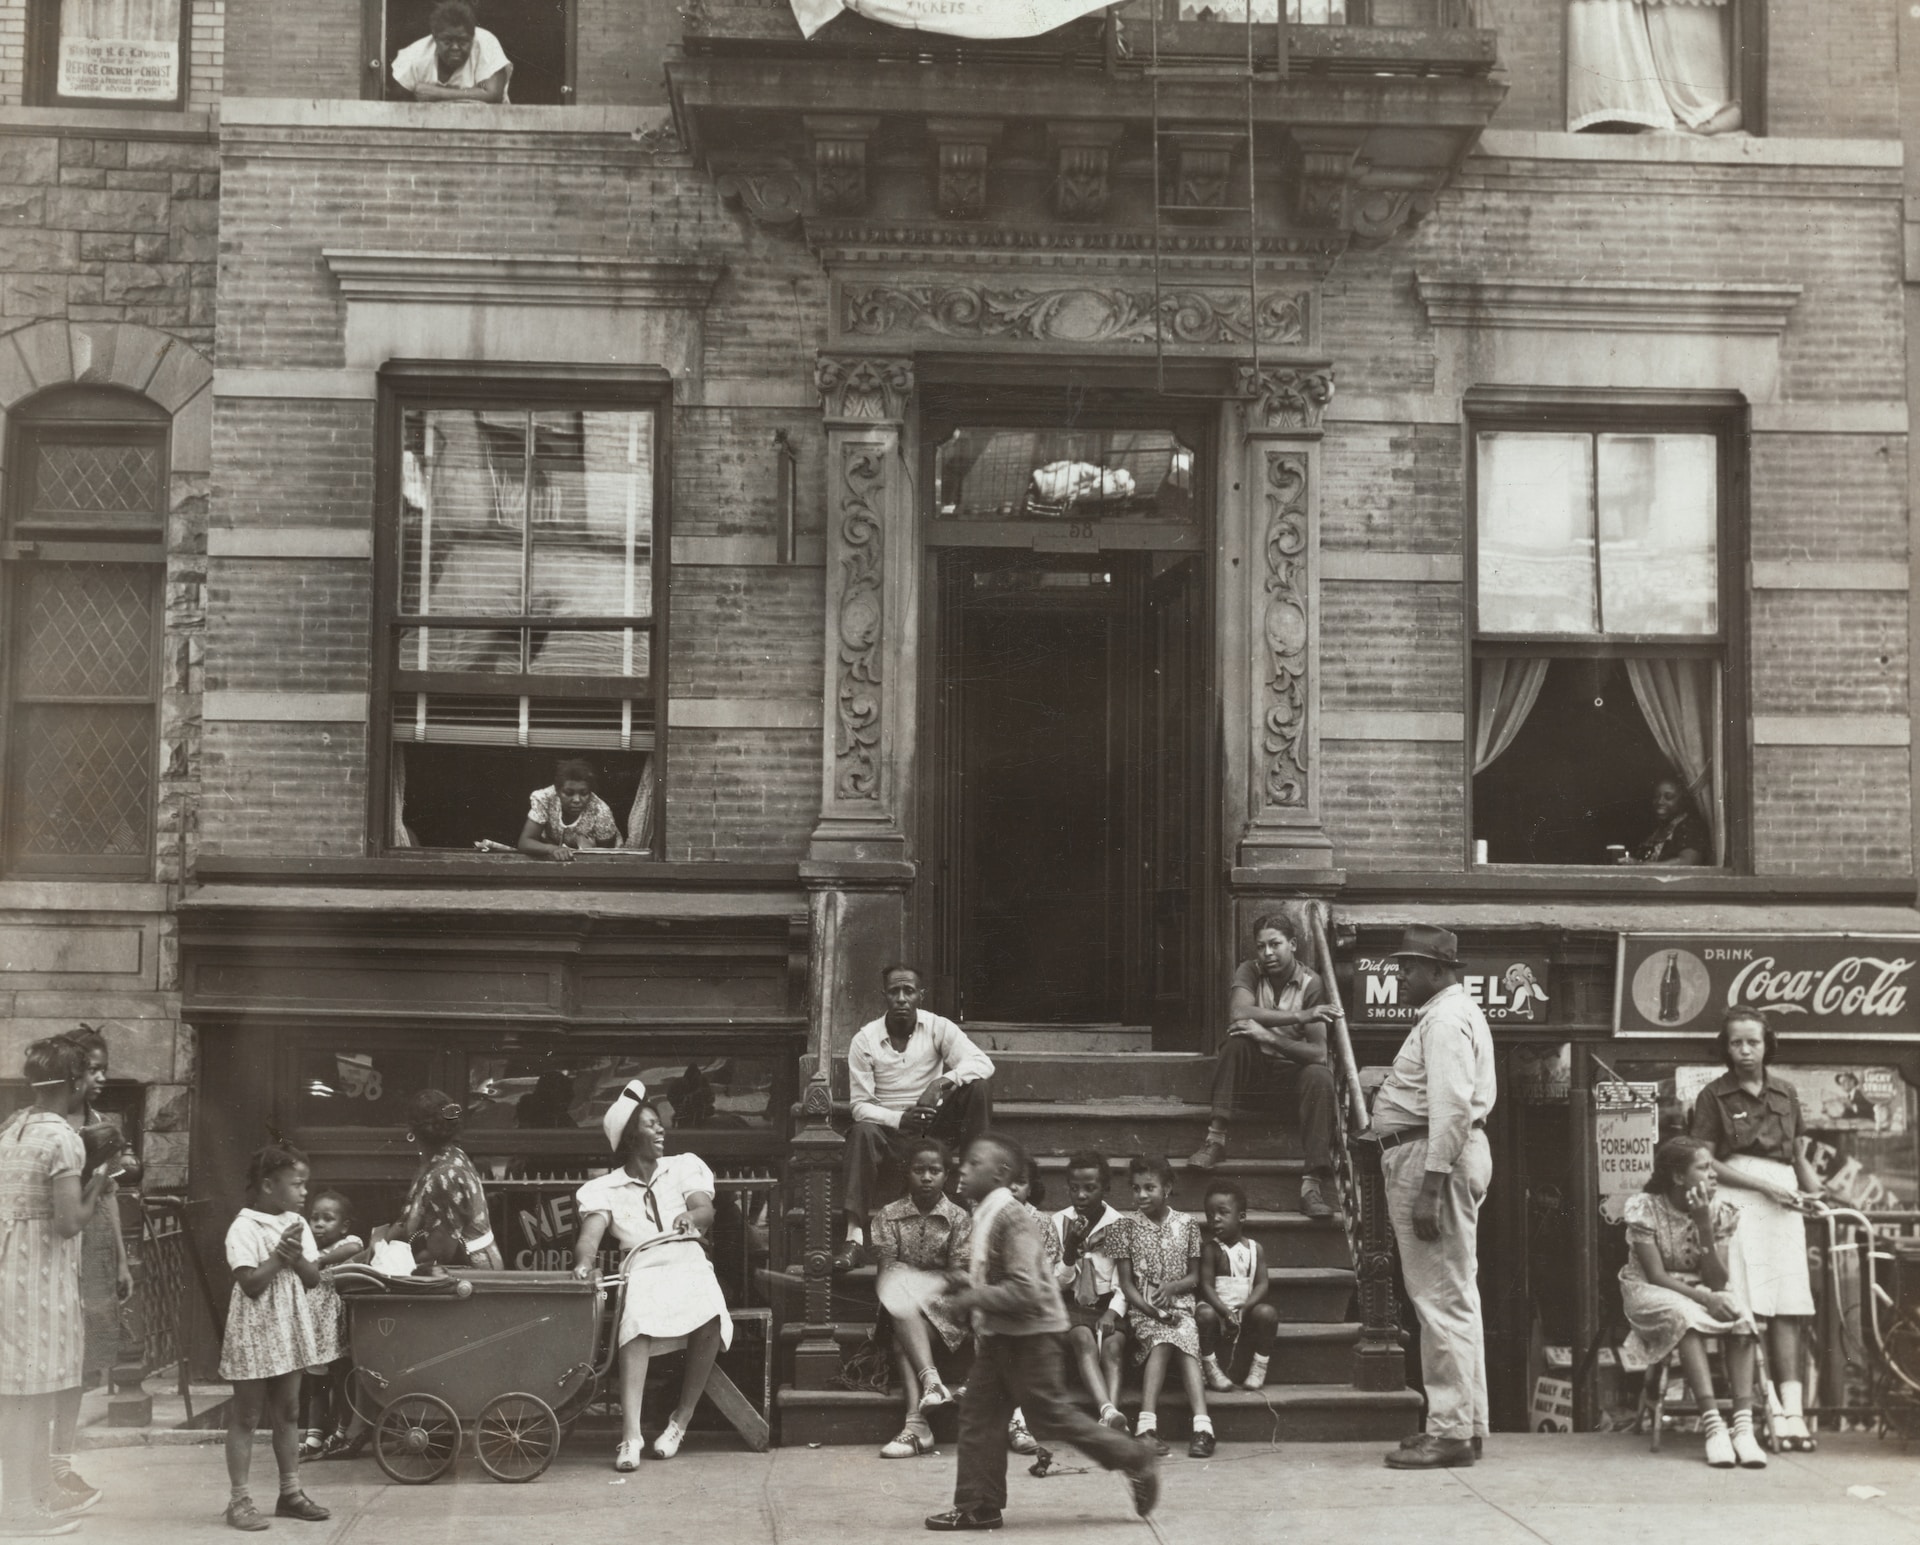 Gilded Age, Tenement Buildings, American History, Living Conditions, Community Resilience, Historical Exploration, Urban Life, Social Issues, Economic Disparity, Architectural History